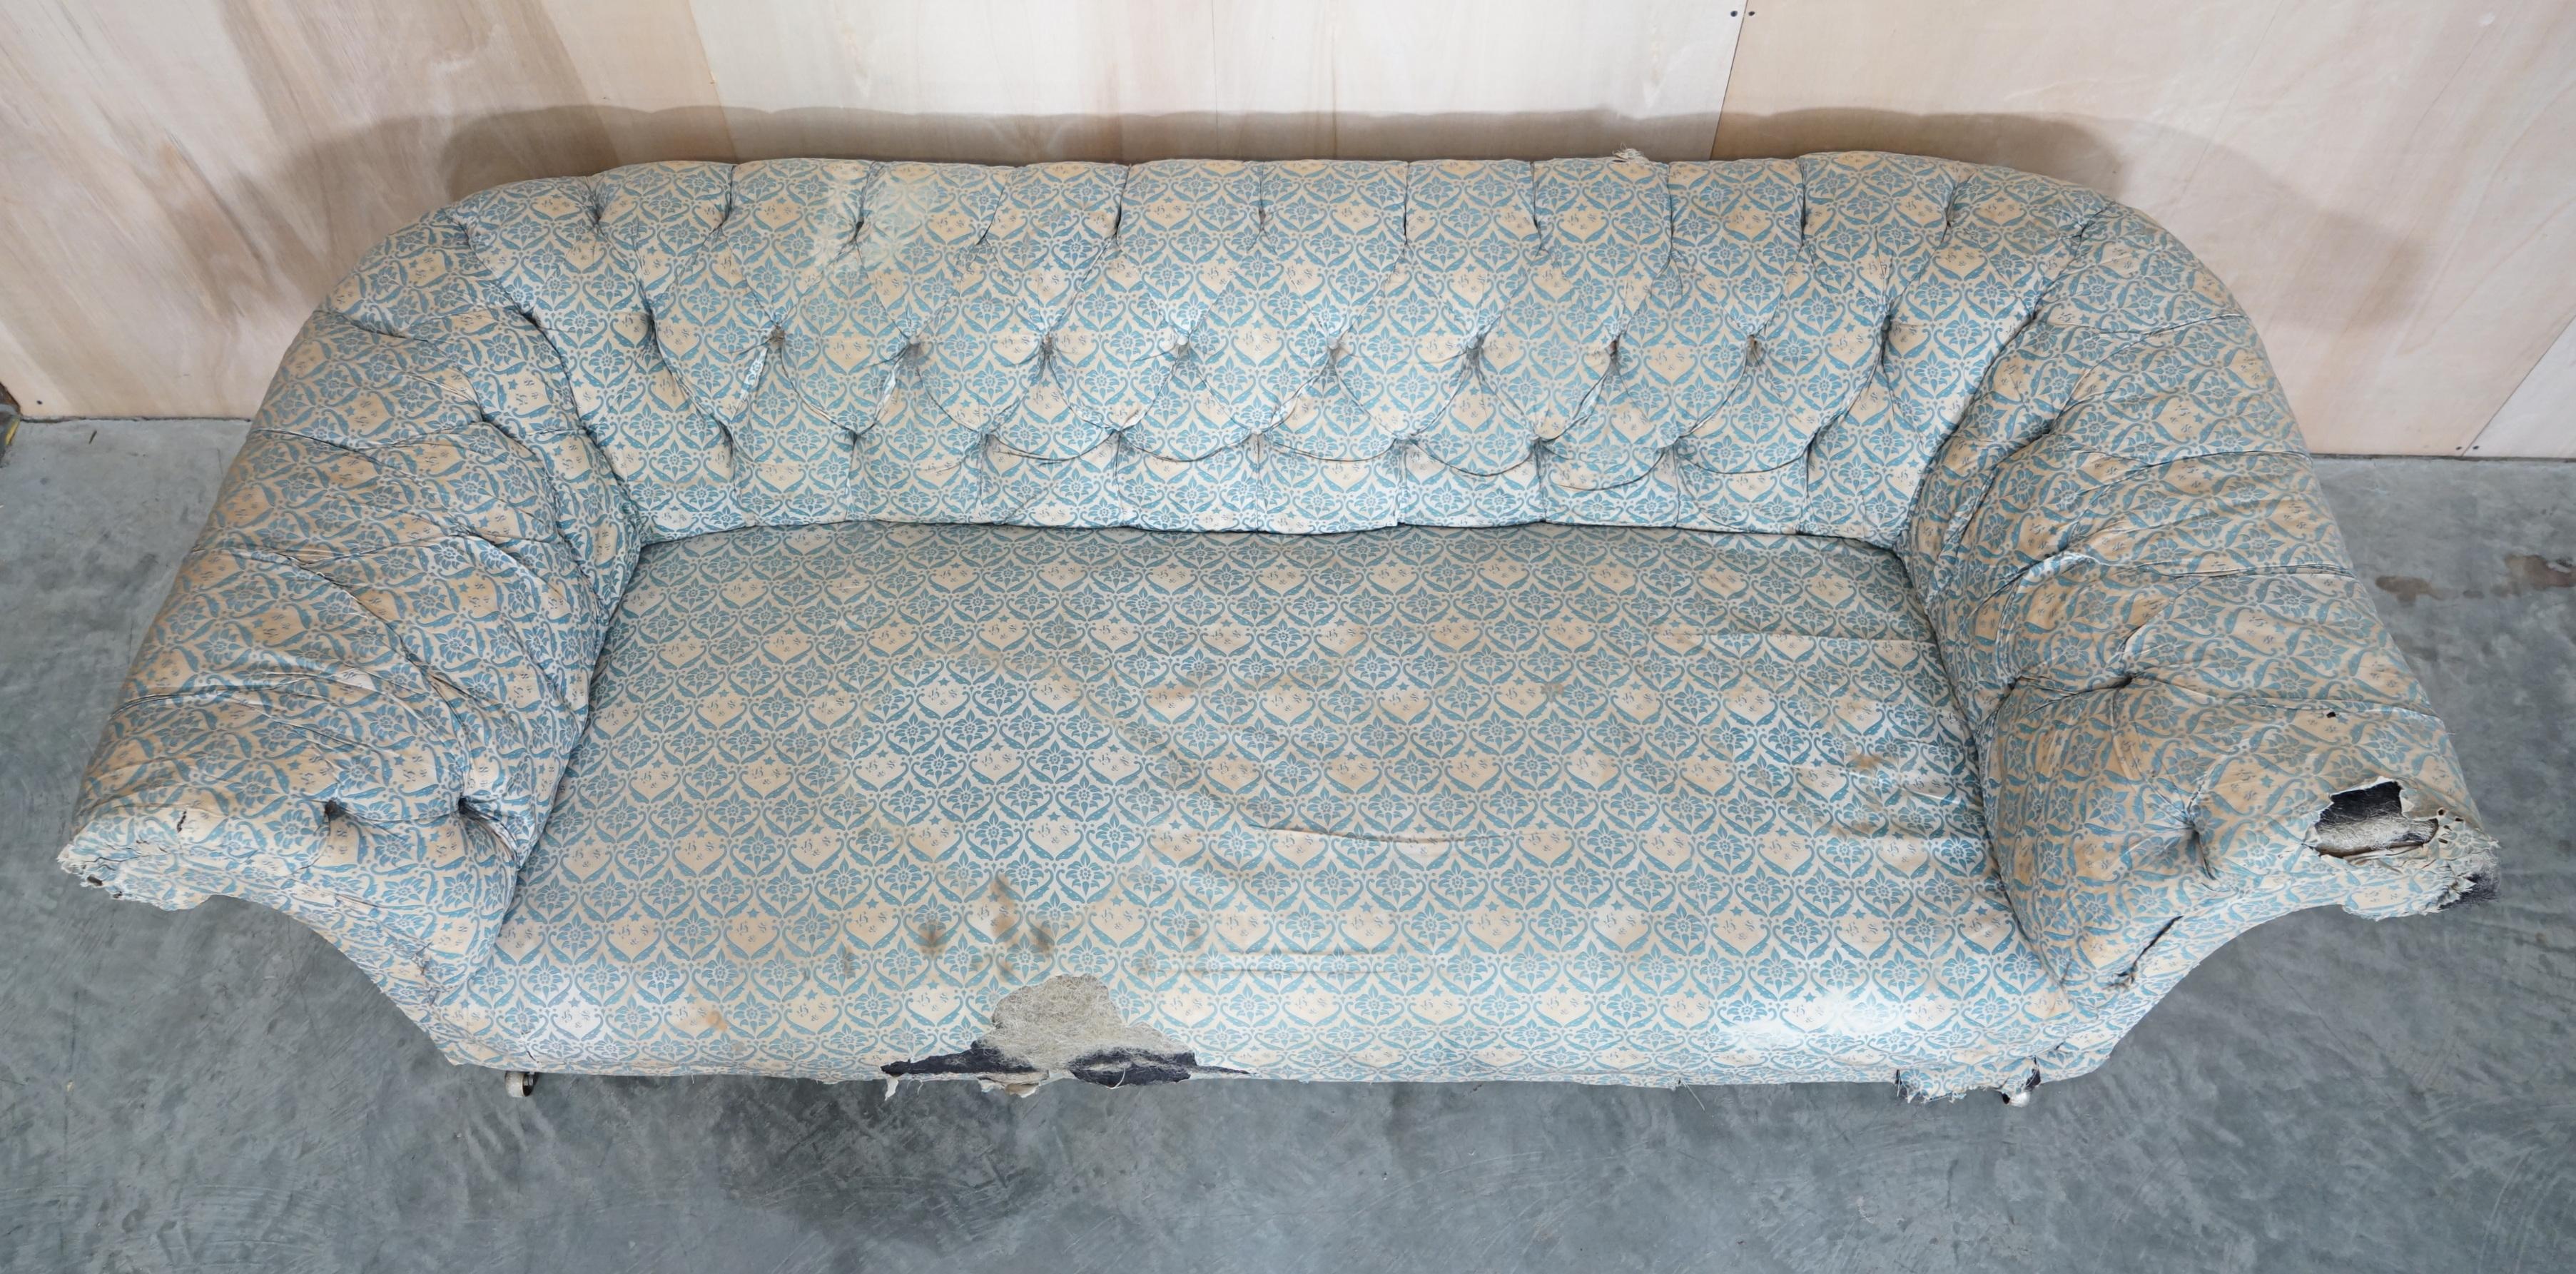 Unrestored Antique Victorian Howard & Son's Chesterfield Sofa Inc Ticking Fabric For Sale 1